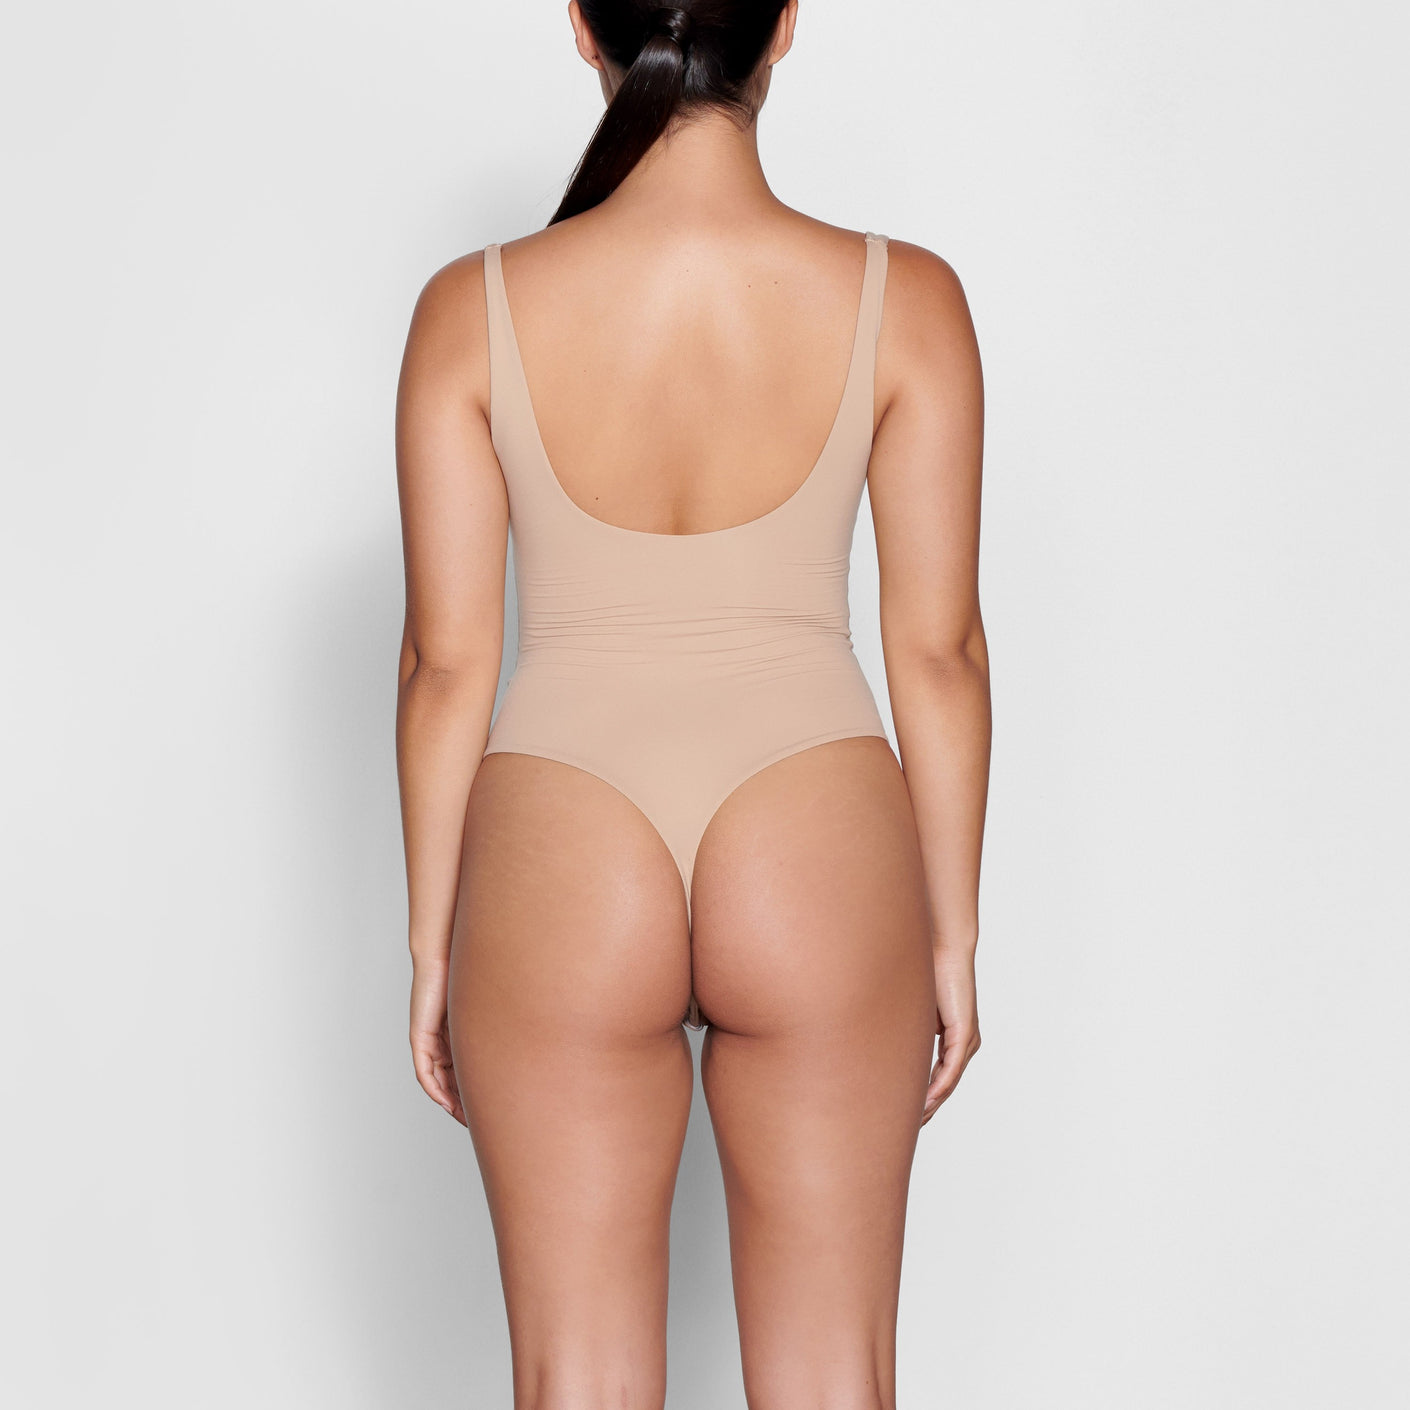 SKIMS - The Body Basics Square Neck Bodysuit in Marble — launching in sizes  XXS - 4X on Tuesday, January 5 at 9AM PT / 12PM ET. Join the waitlist for  early